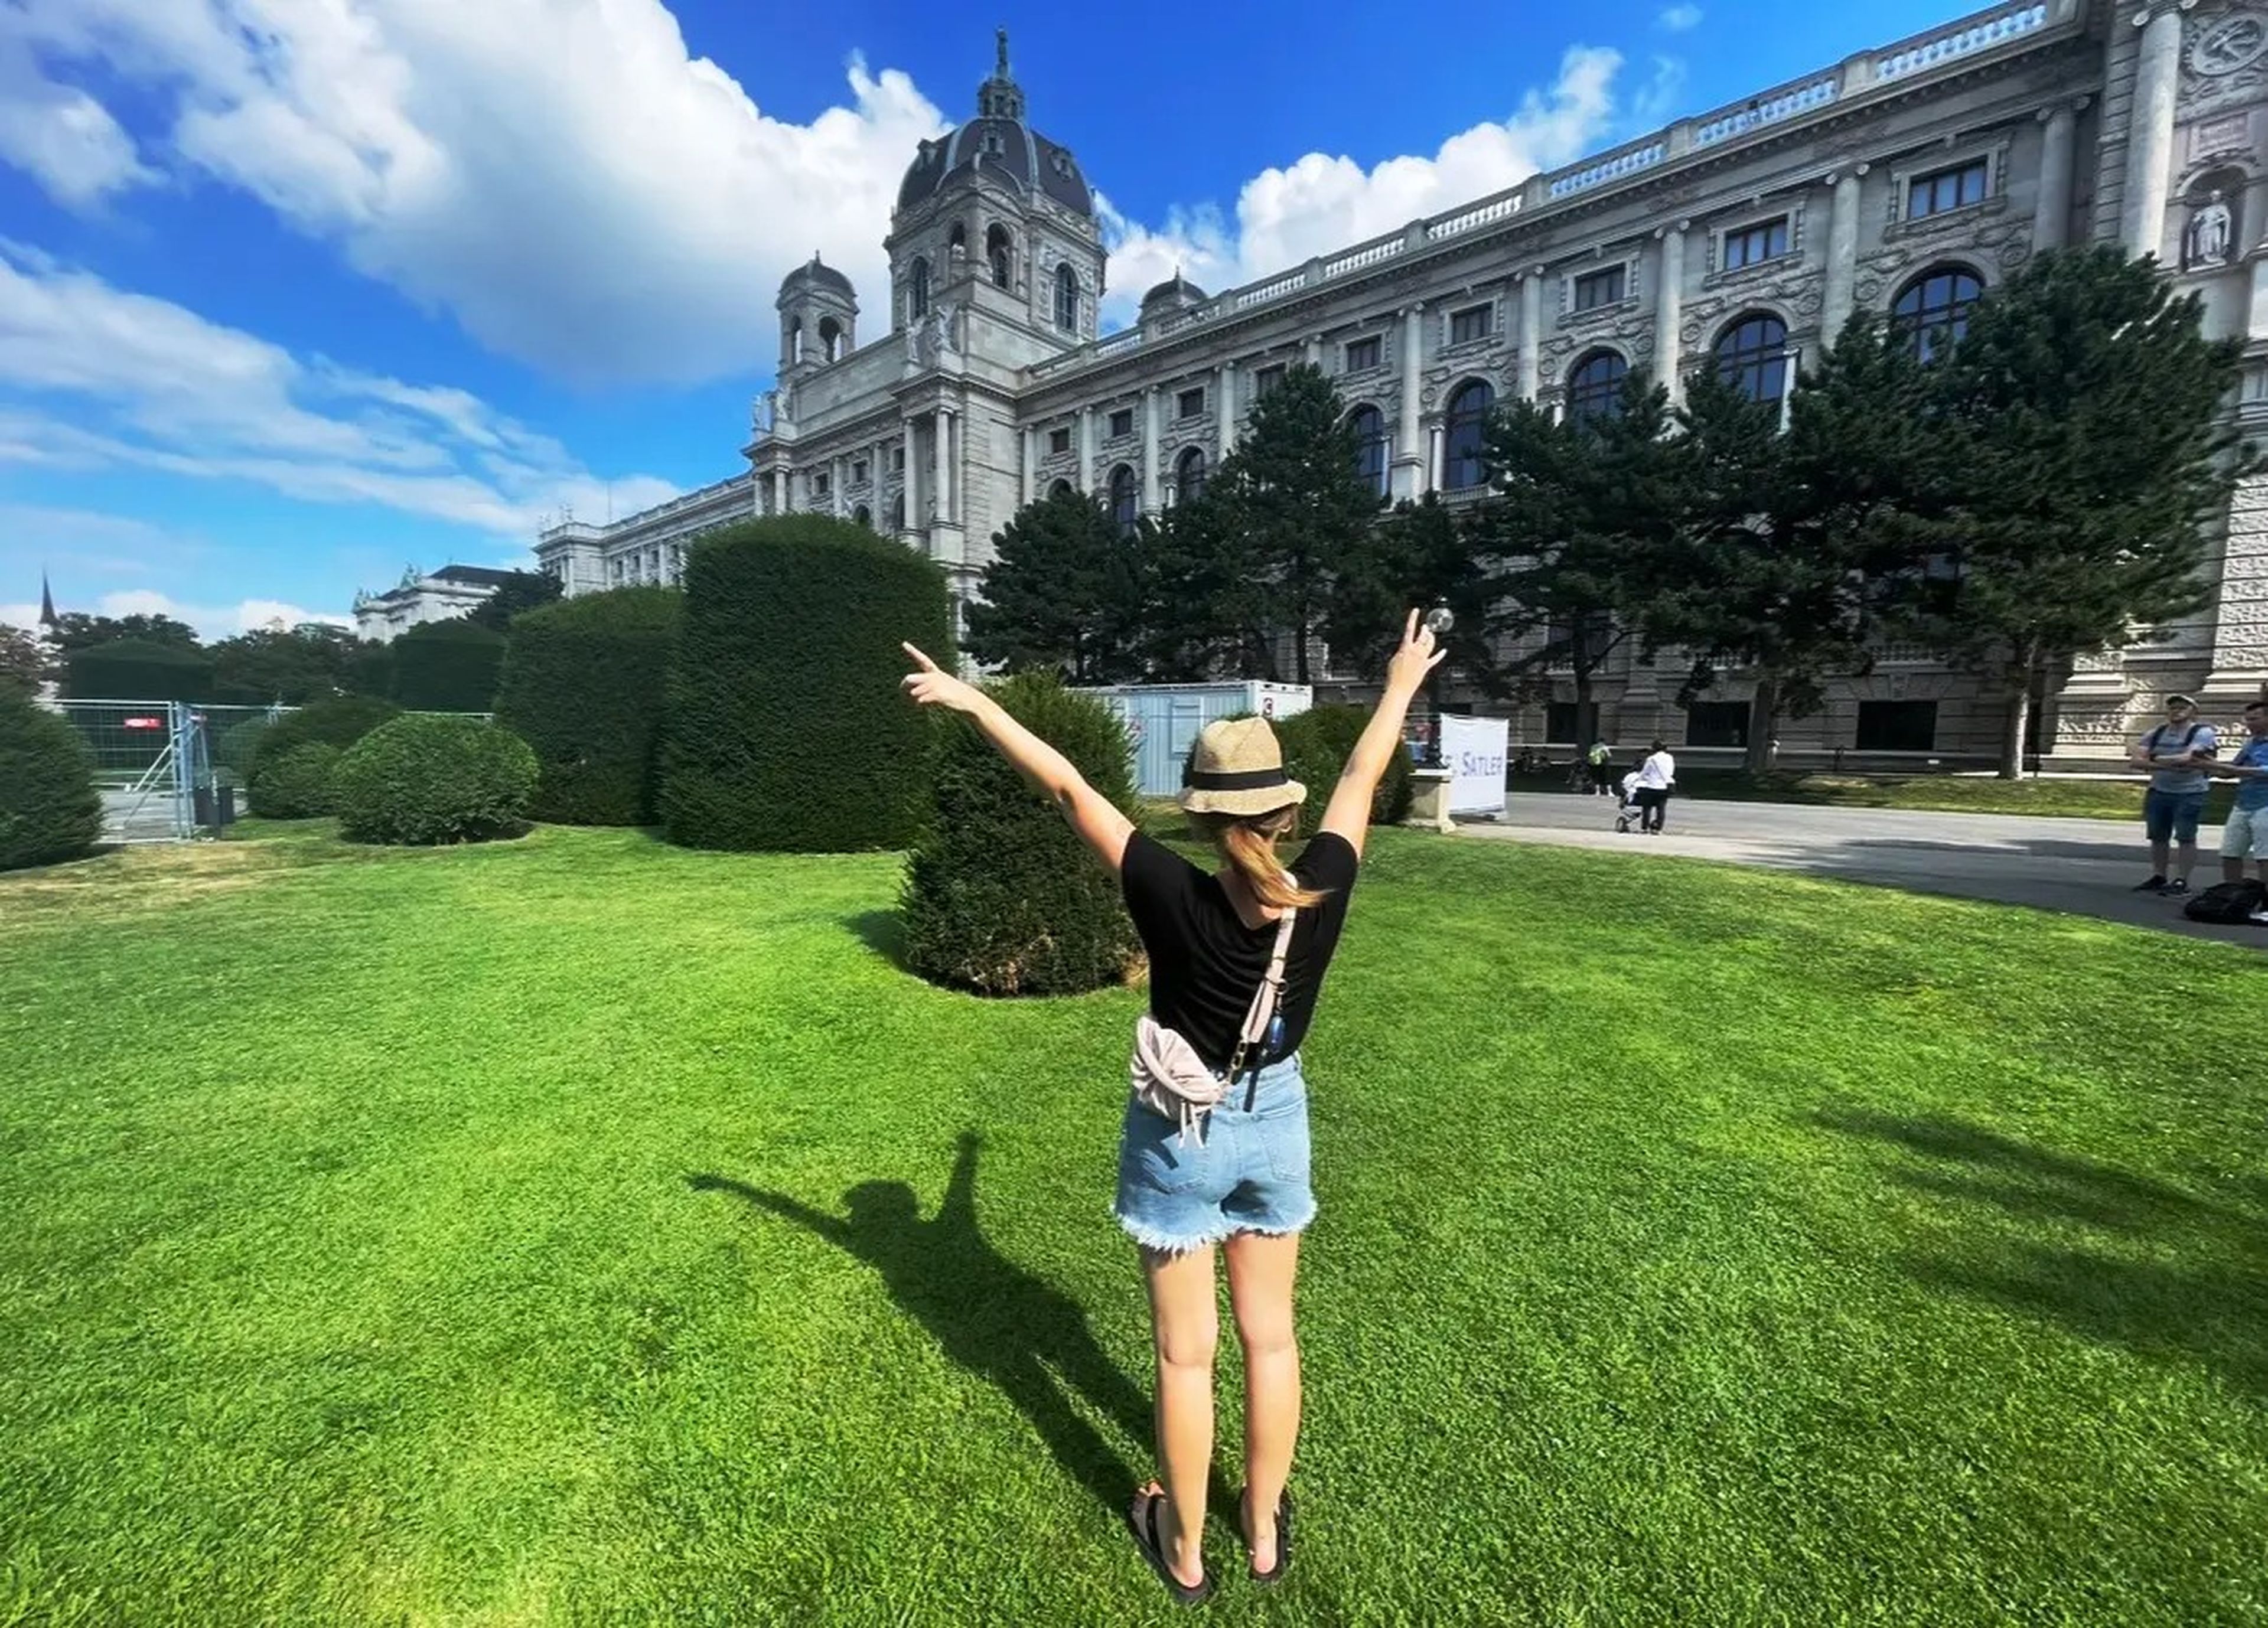 Author Hayley Domin with her arms raised in front of a landmark